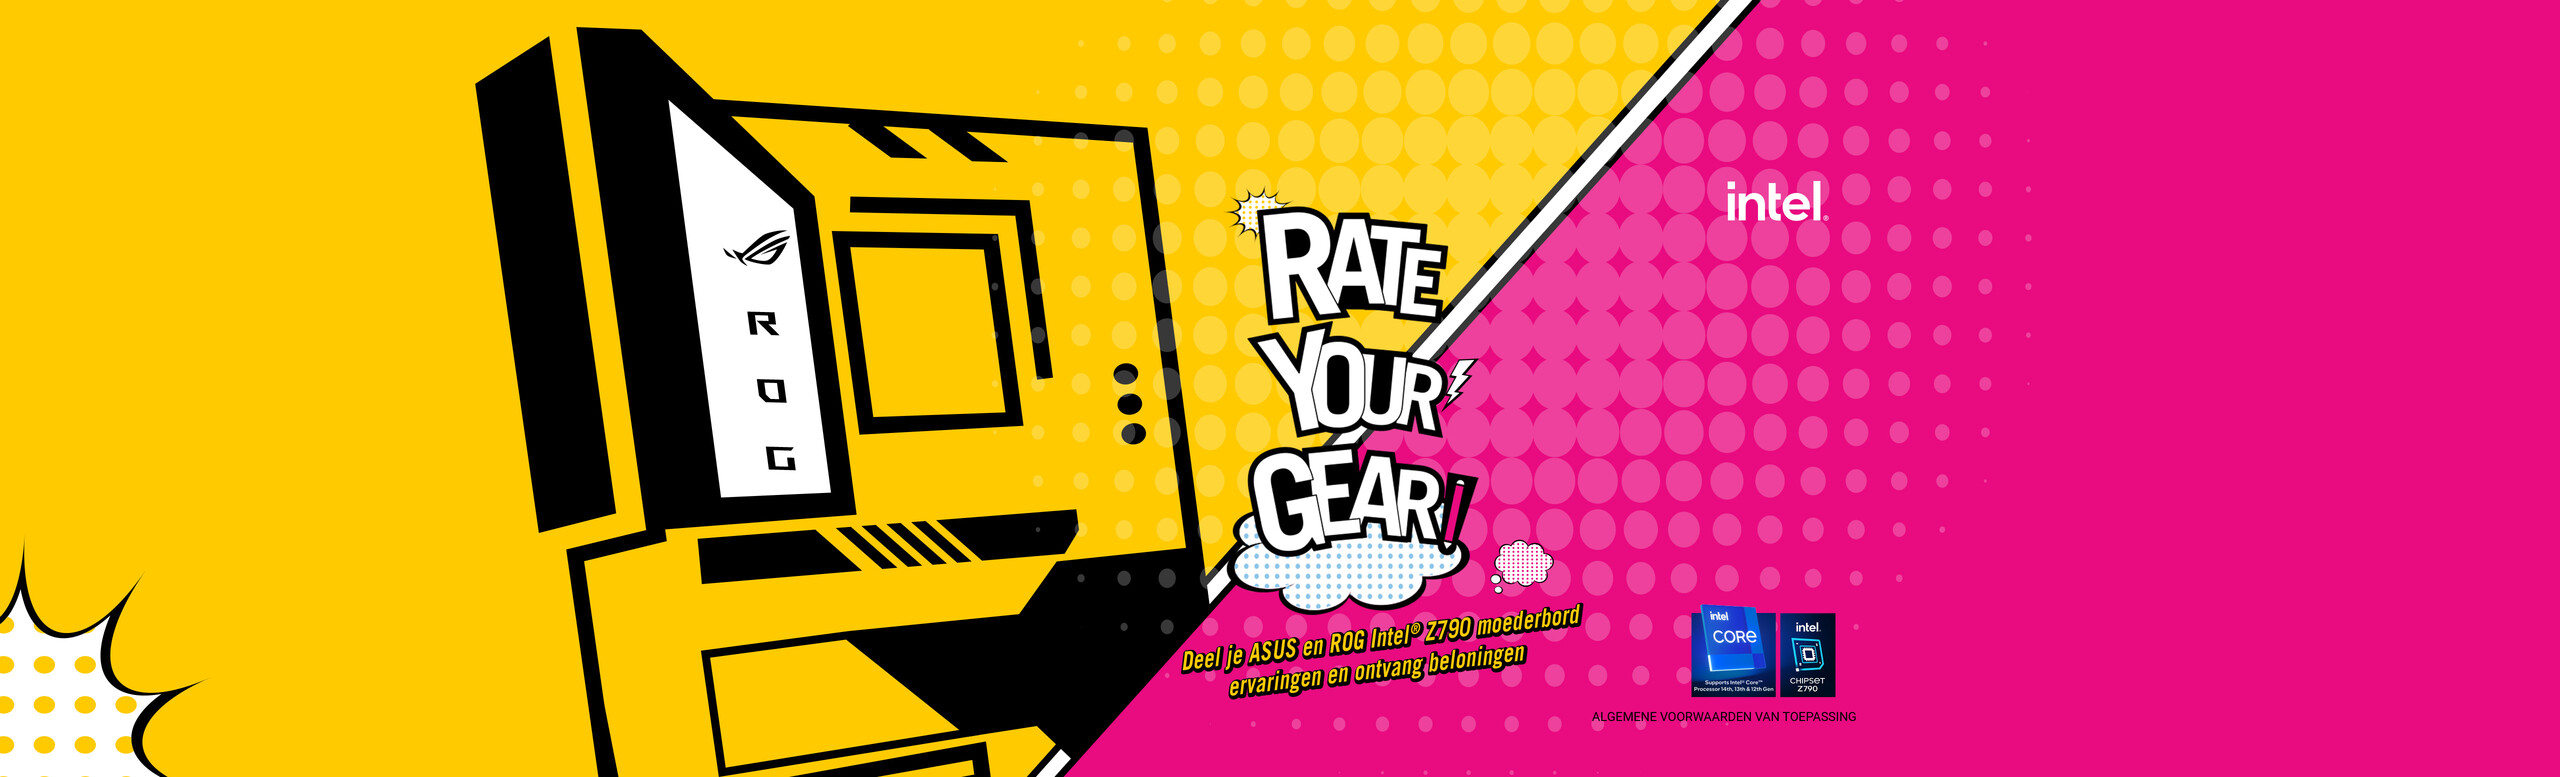 rate-your-gear